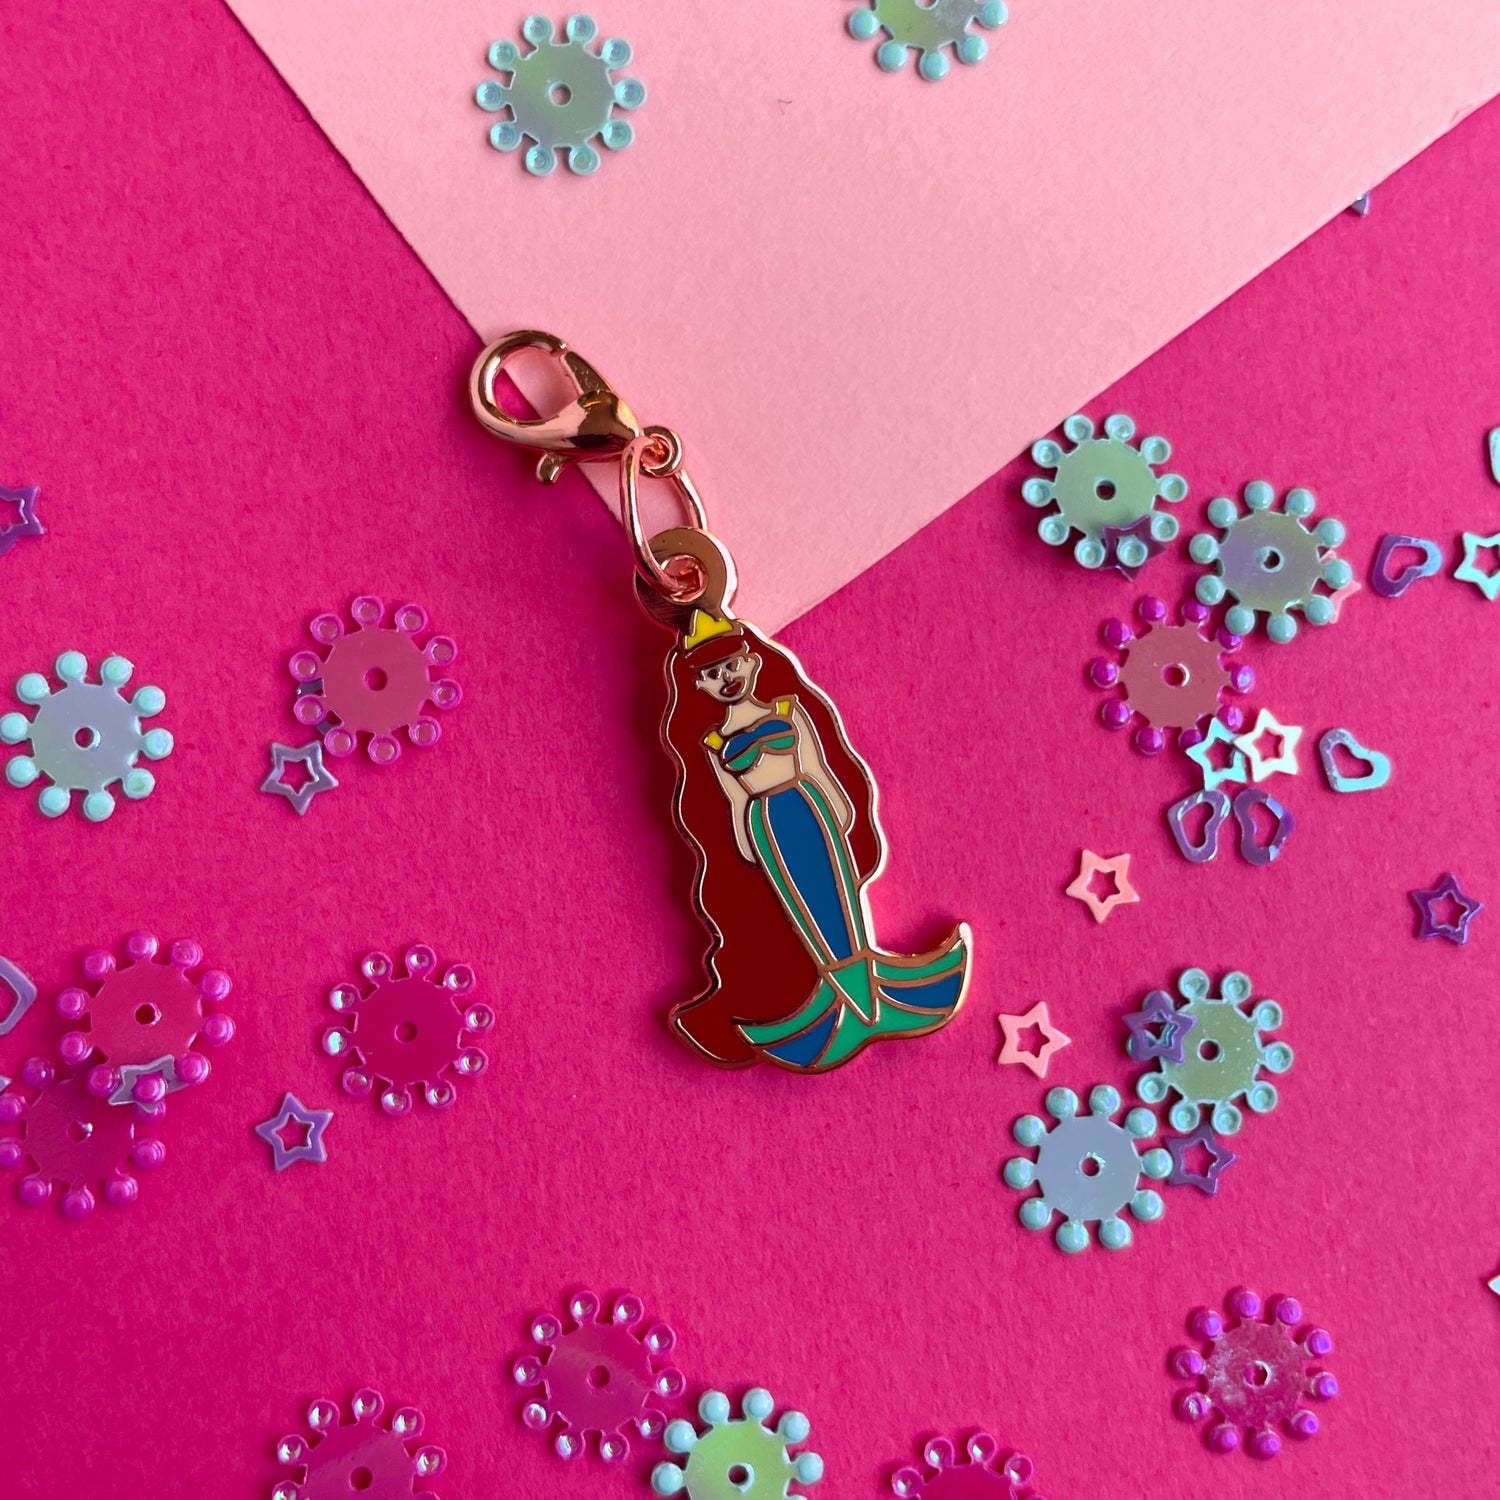 A lobster claw clasp charm shaped like a mermaid with long red hair and a green tail on a pink paper background.